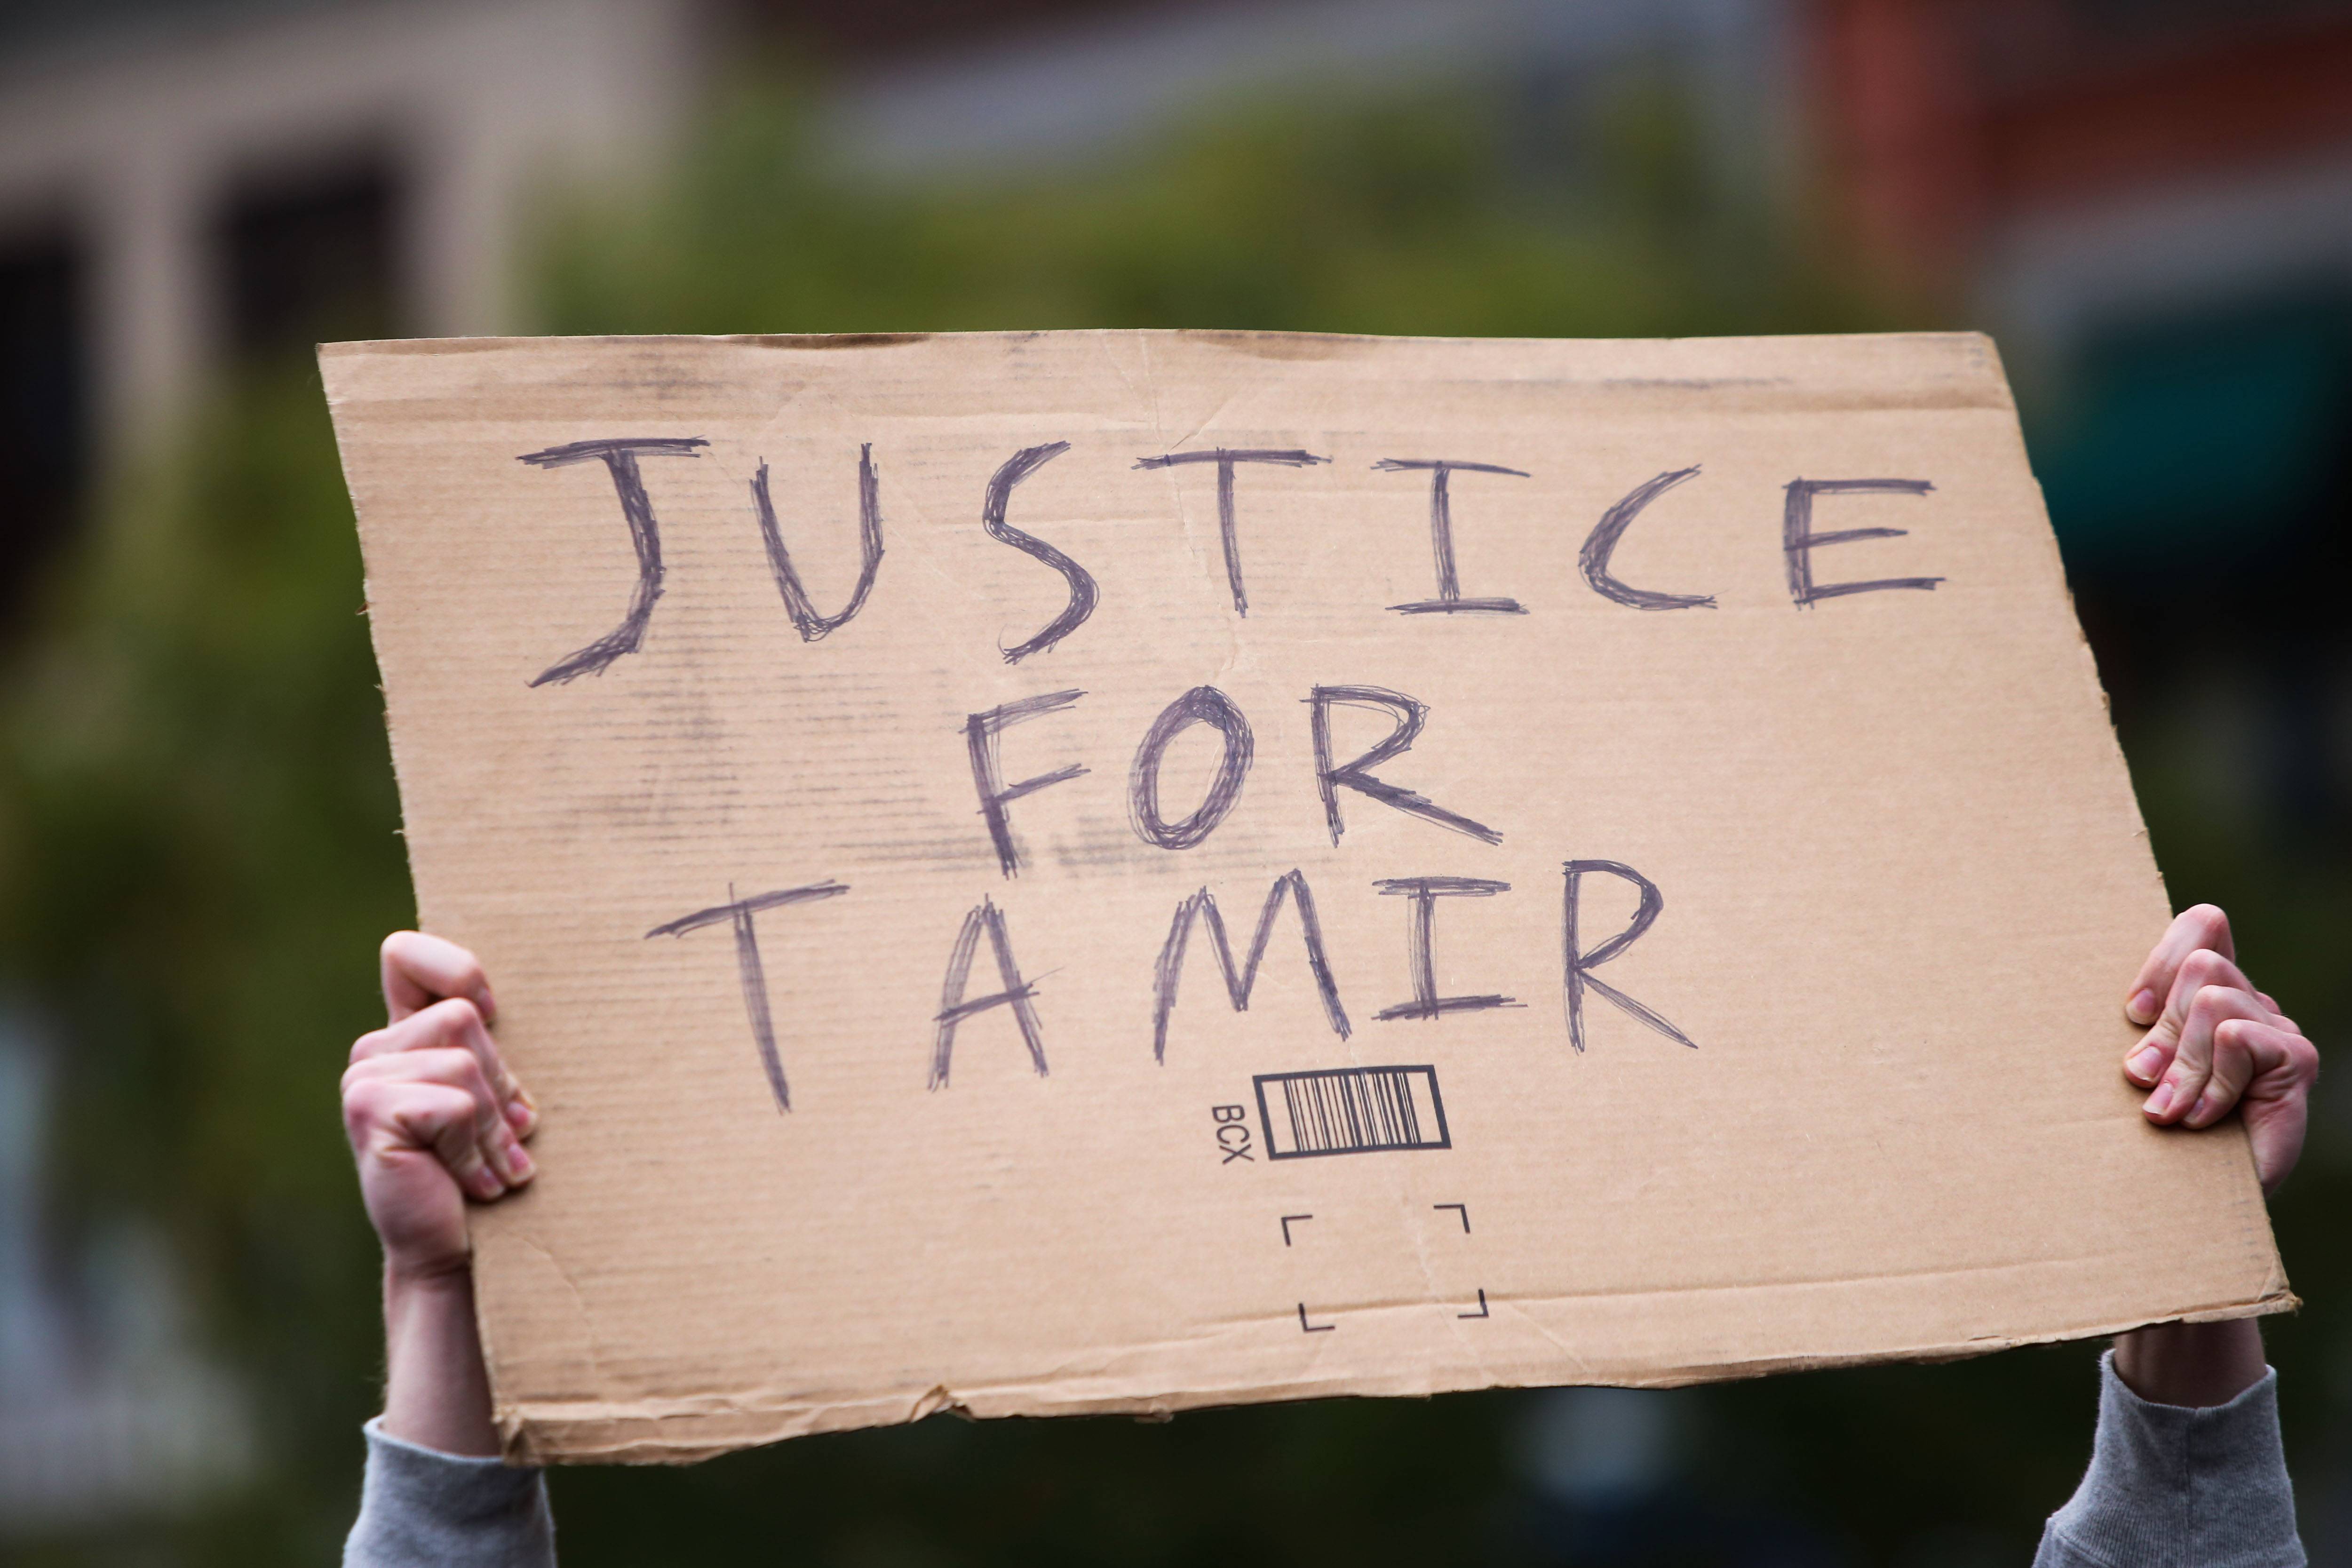 MANHATTAN, NEW YORK CITY, NEW YORK, UNITED STATES - 2015/11/22: Justice for Tamir sign held aloft. Stop Mass Incarcerations Network sponsored a children's march demanding accountability on the one year anniversary of Tamir Rice's death at the hands of the Cleveland police. (Photo by Andy Katz/Pacific Press/LightRocket via Getty Images)